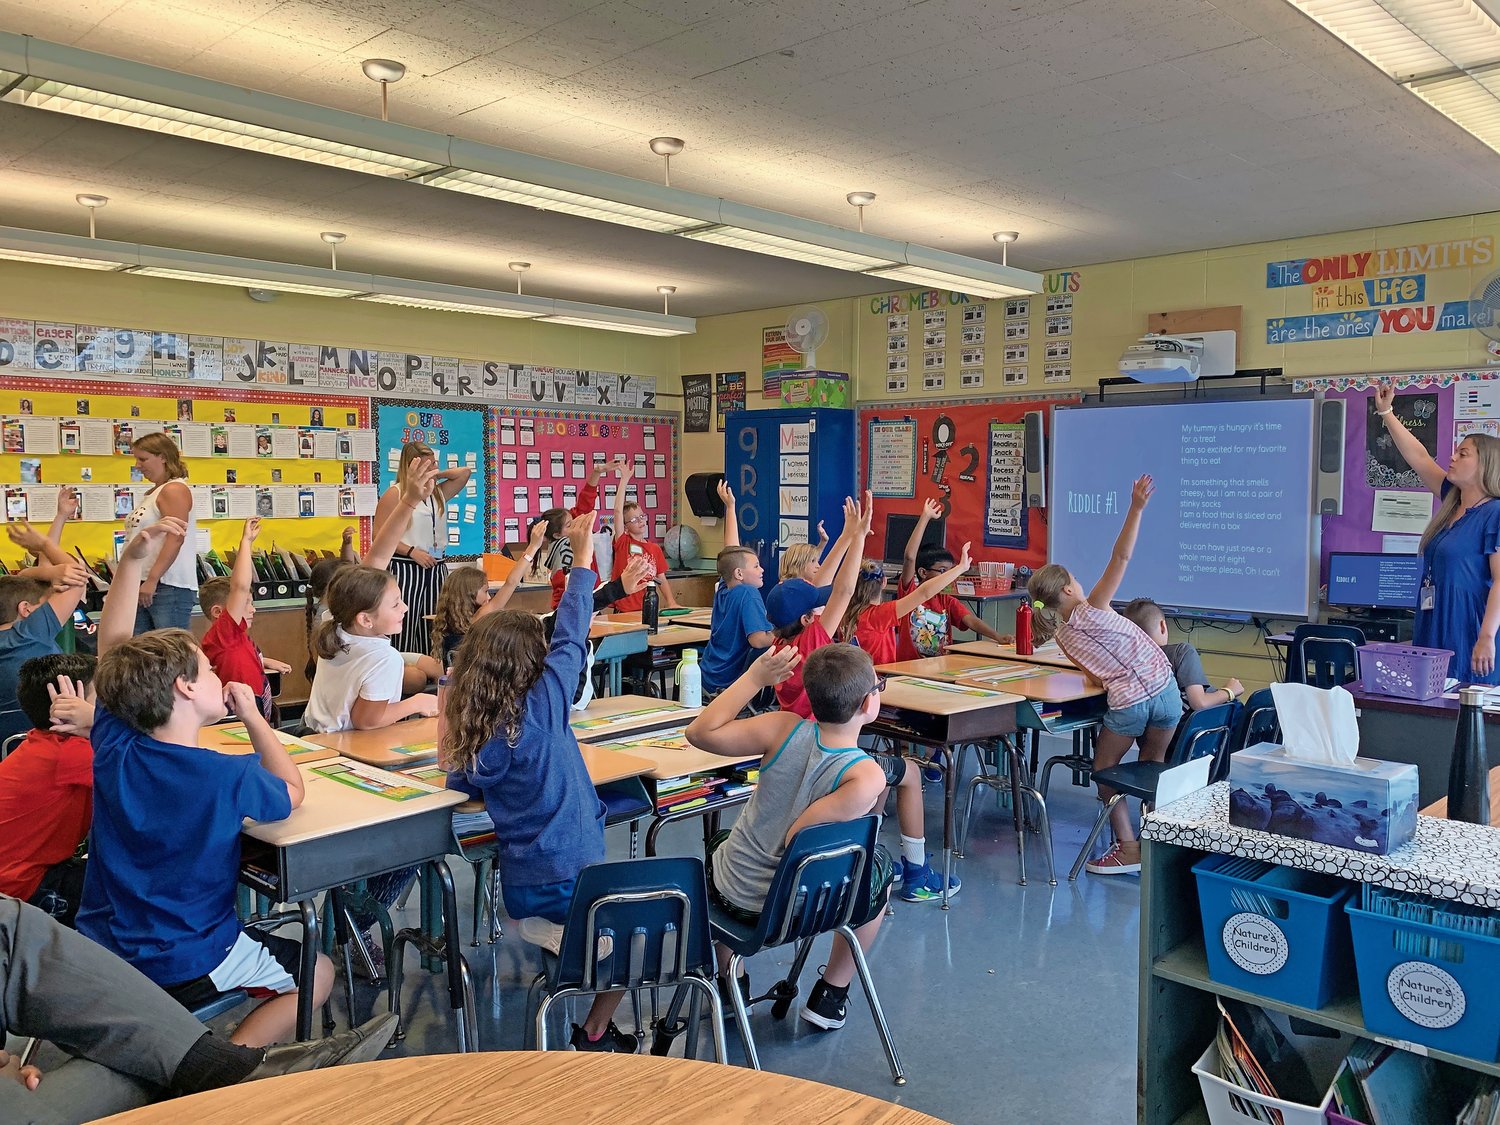 Samantha Jannotte, far right, led a class on mindfulness to elementary school students. As a new health and wellness provider, she will visit fourth and fifth grade classes throughout the year to teach students about maintaining mental and physical health.